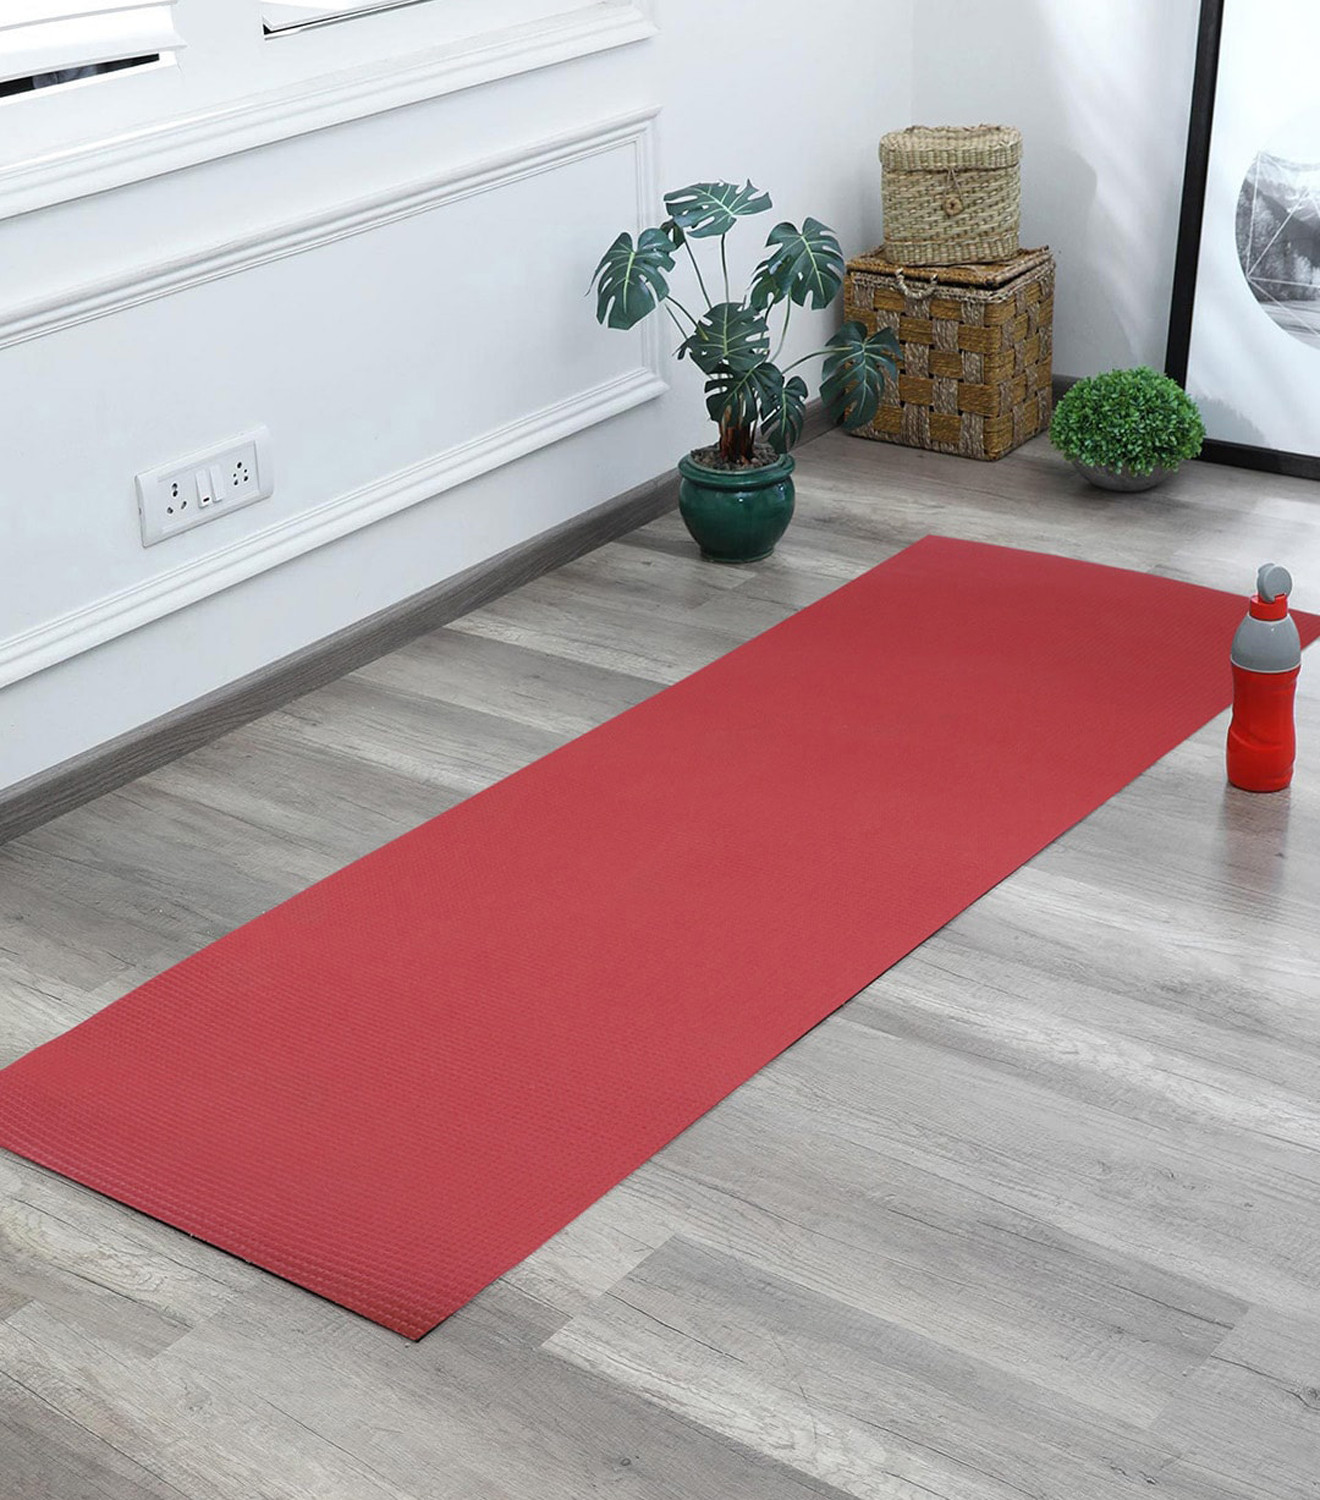 Kuber Industries 4 MM Extra Thick Yoga mat for Gym Workout and Flooring Exercise Long Size Yoga Mat for Men and Women, 6 x 2 Feet (Maroon)-33_S_KUBQMART11574